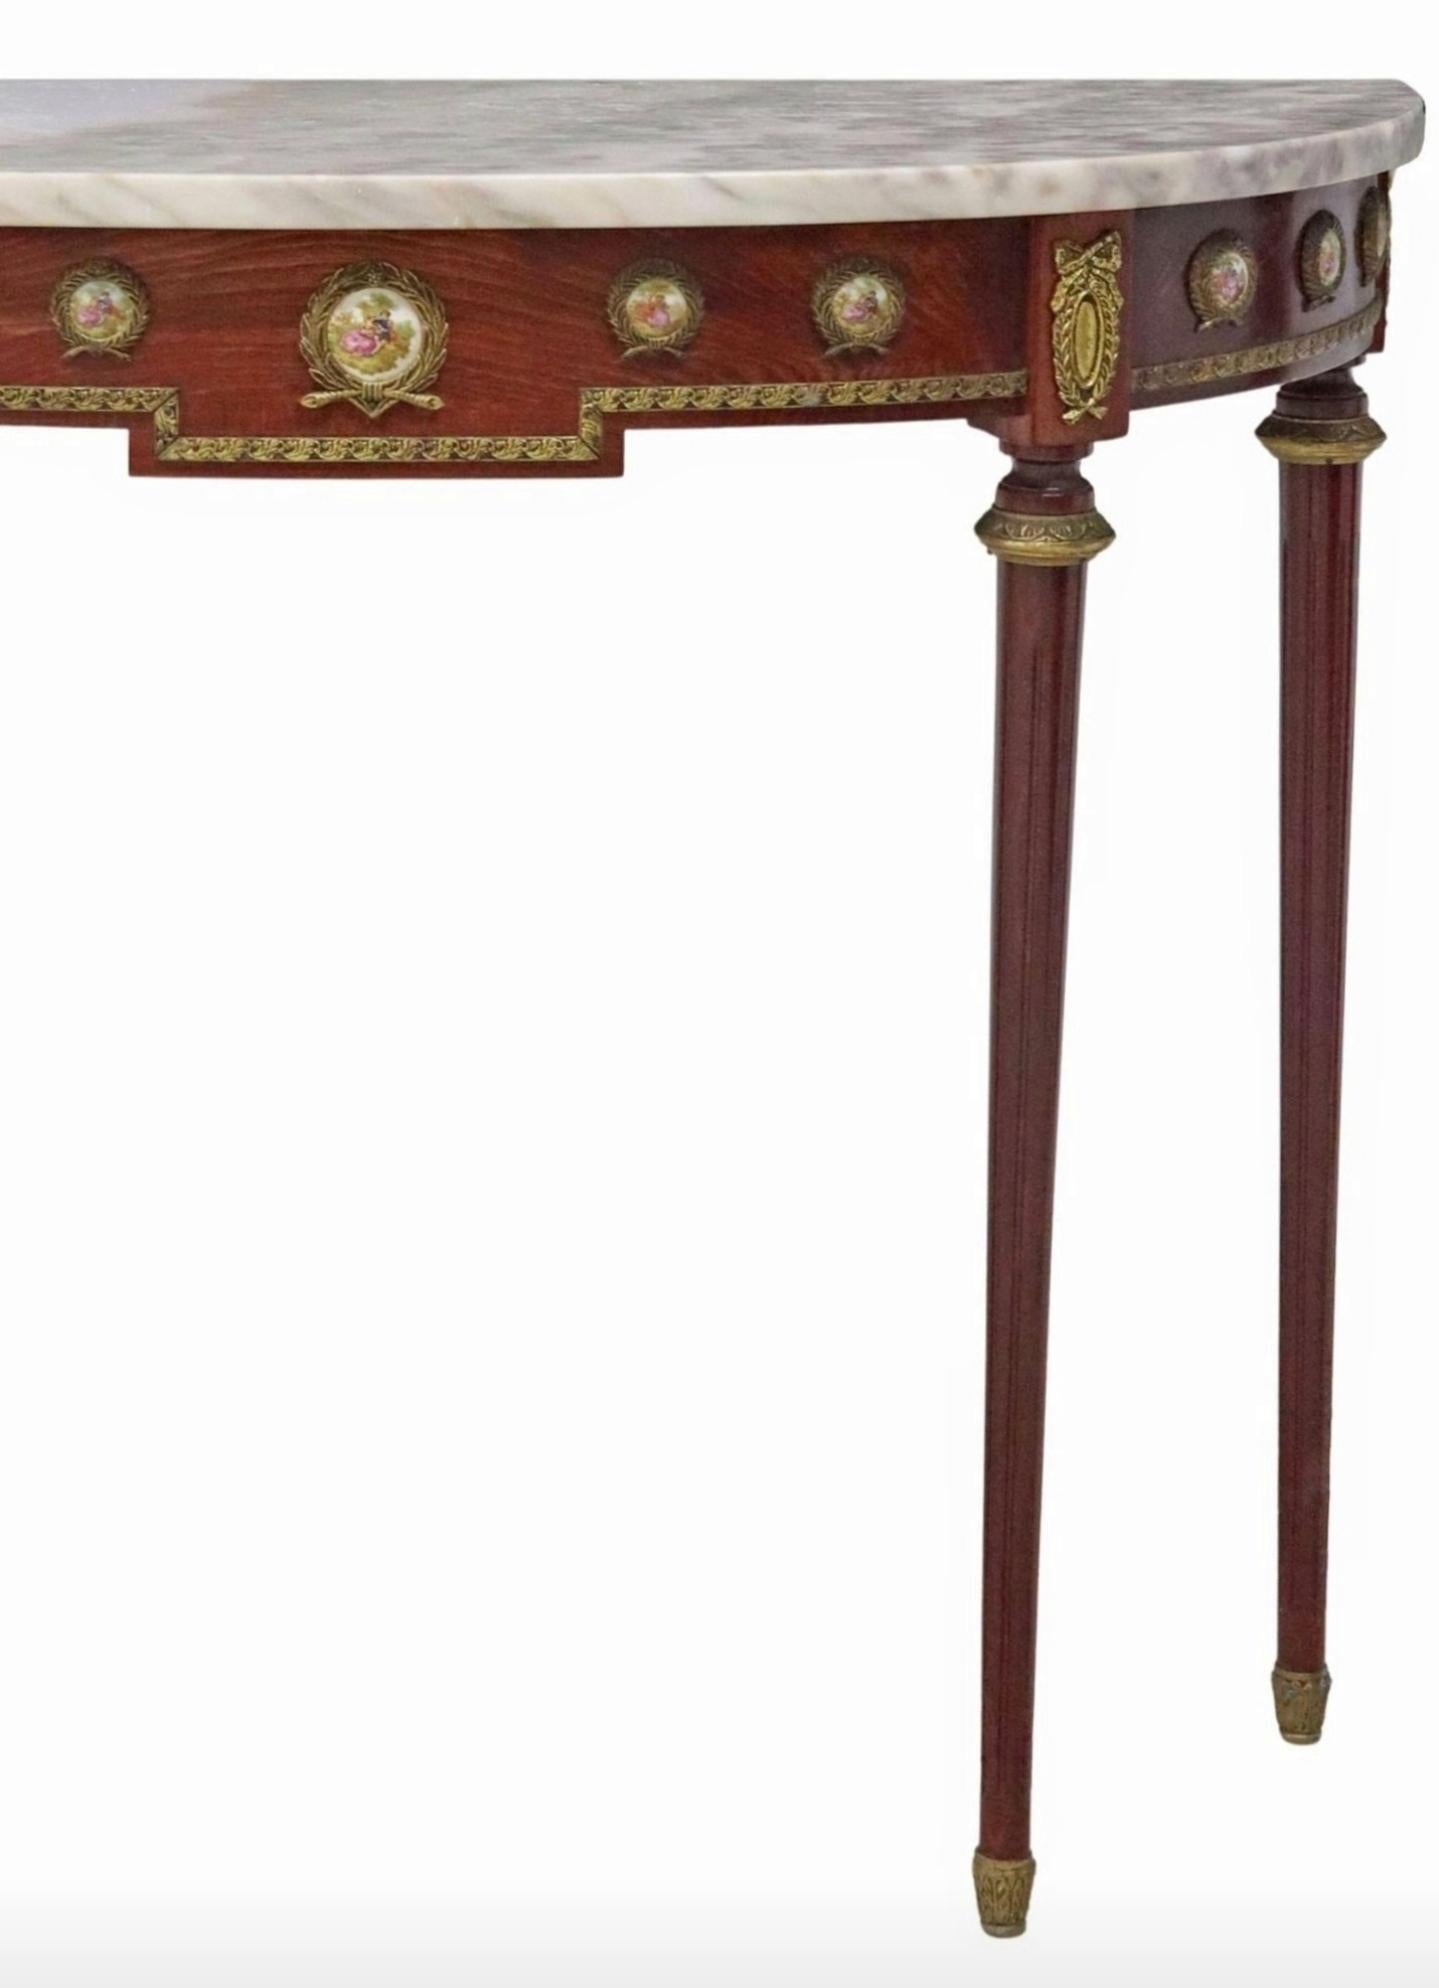 Fine Louis XVI Revival Console Table by Harry & Lou Epstein In Good Condition For Sale In Forney, TX